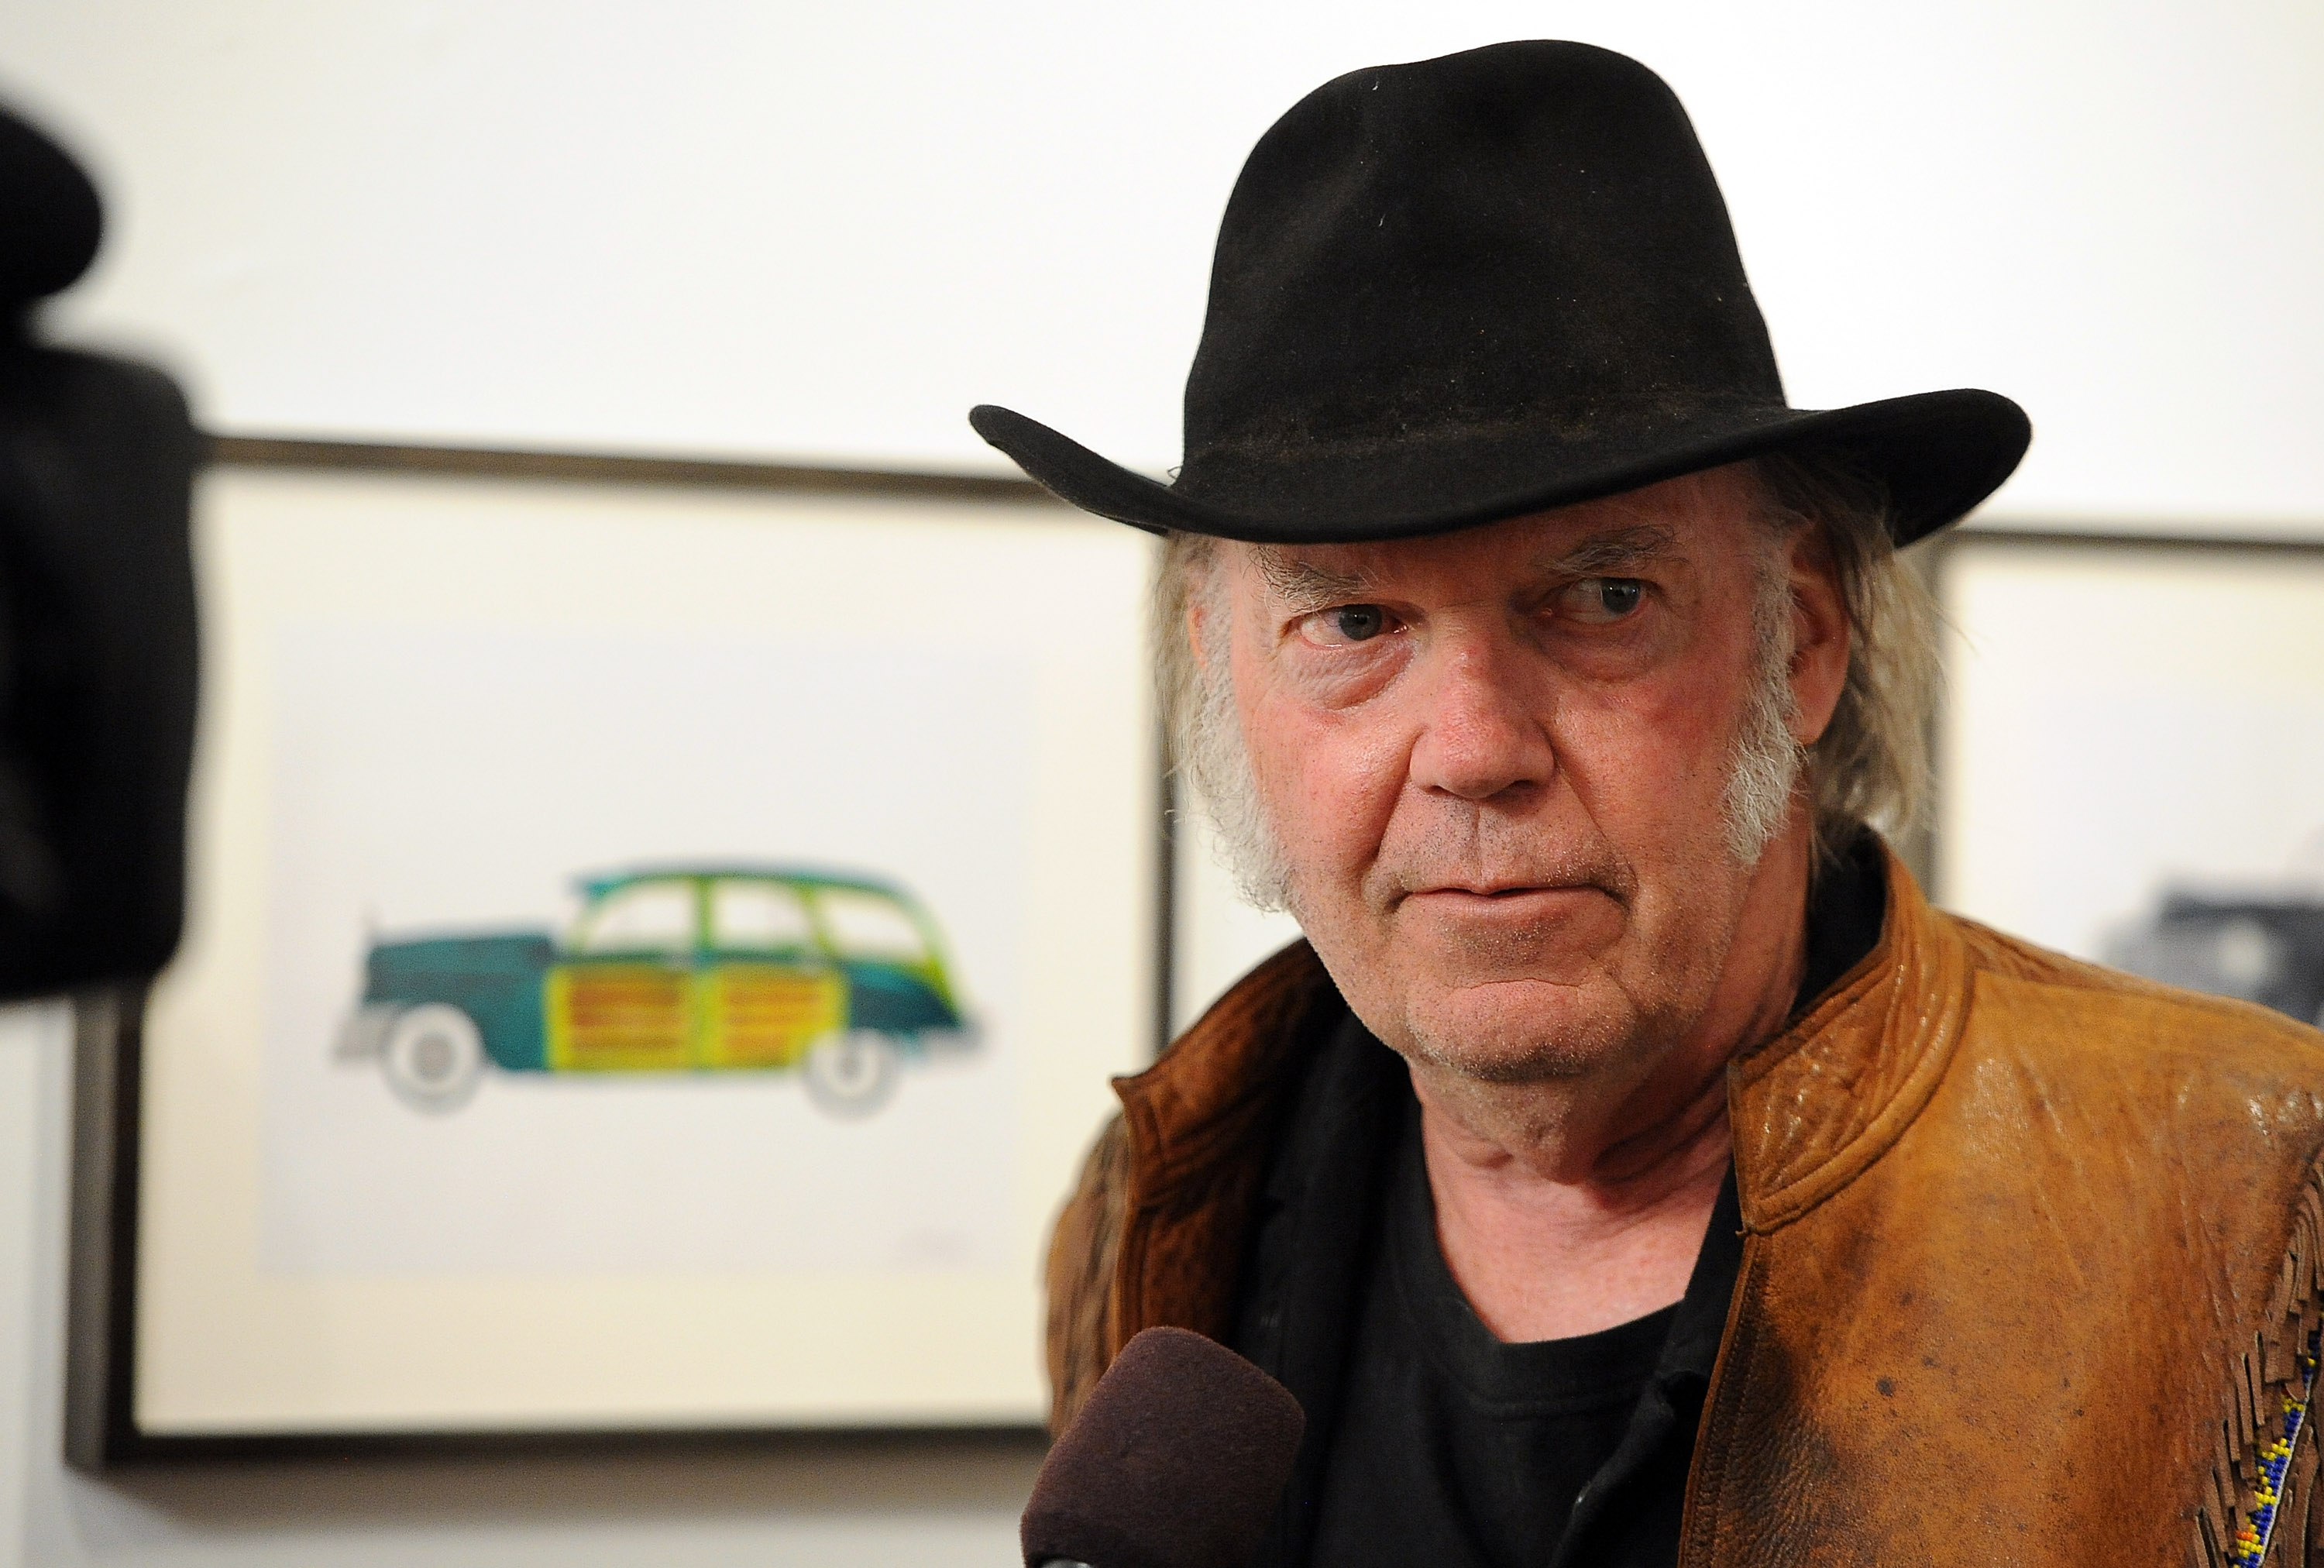 Neil Young at Robert Berman Gallery in Santa Monica, Calif. on Nov. 3, 2014. (Angela Weiss—Getty Images)